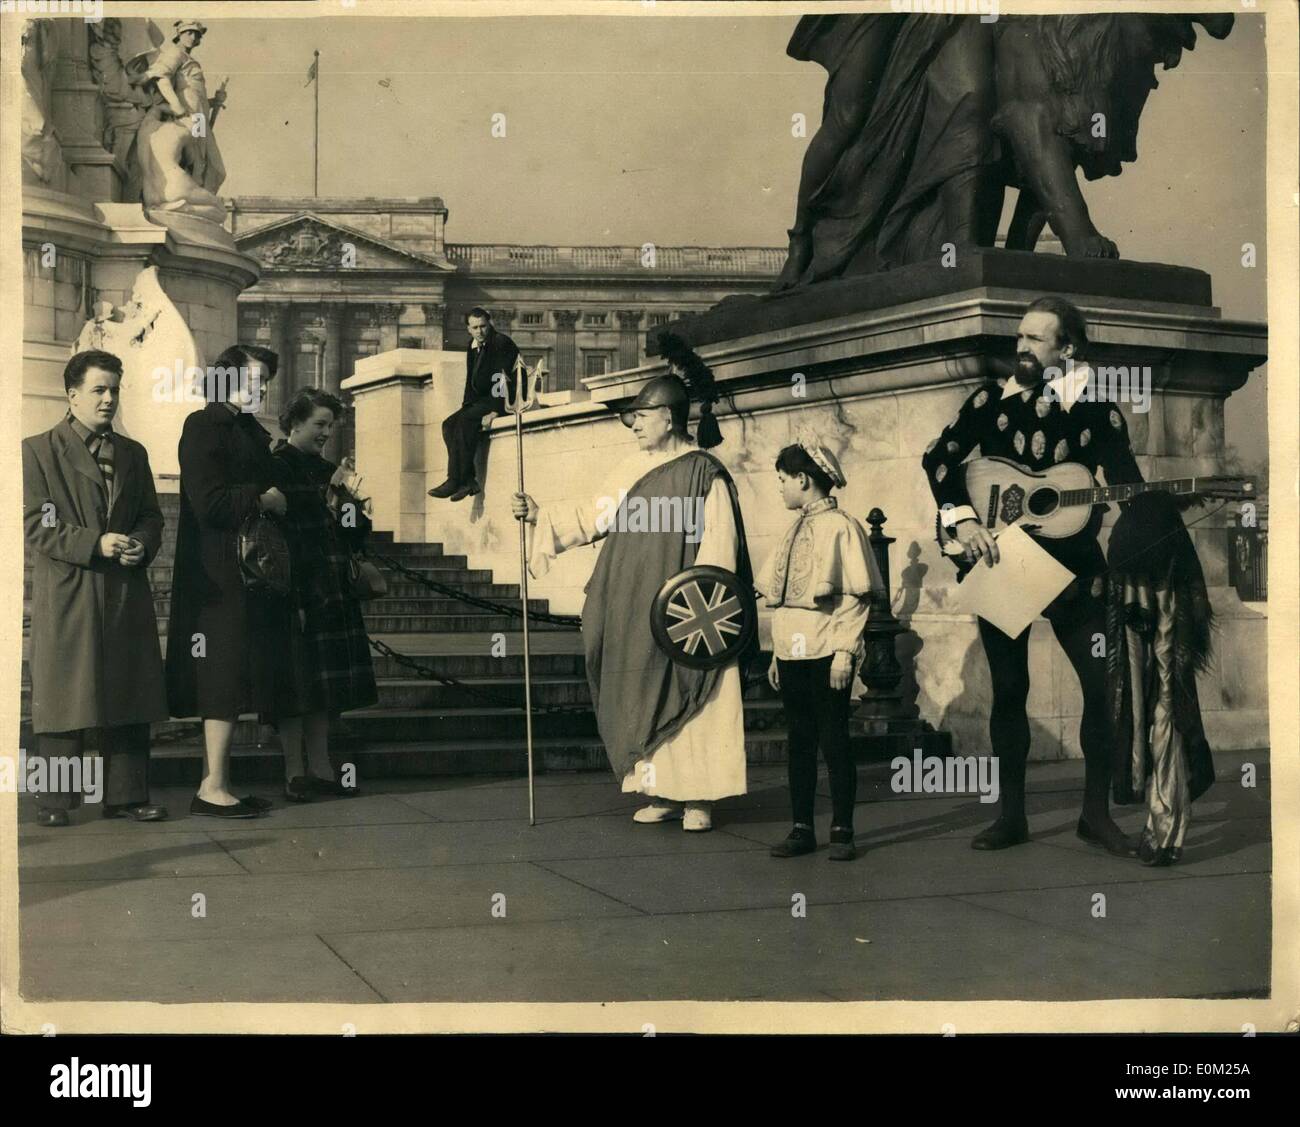 Apr. 04, 1953 - Shakespearian Actors Serenade Buckingham Palace in Honor of the Queen's Birthday. A party of Shakespearian Actors under the leadership of G. Francis J. Stanislaw went to the Victoria Memorial outside Buckingham Palace this morning for the purpose of Serenading the Palace. in honor of the Queen's Birthday. Keystone Photo Shows: G. Francis J. Stanislaw as Duke of Vienna ; Mrs. A.F. Stanislaw as Britanna and Nicholas Shaw as The Child Hamlet . watched by onlookers as they Serenaded on the Memorial today. Stock Photo